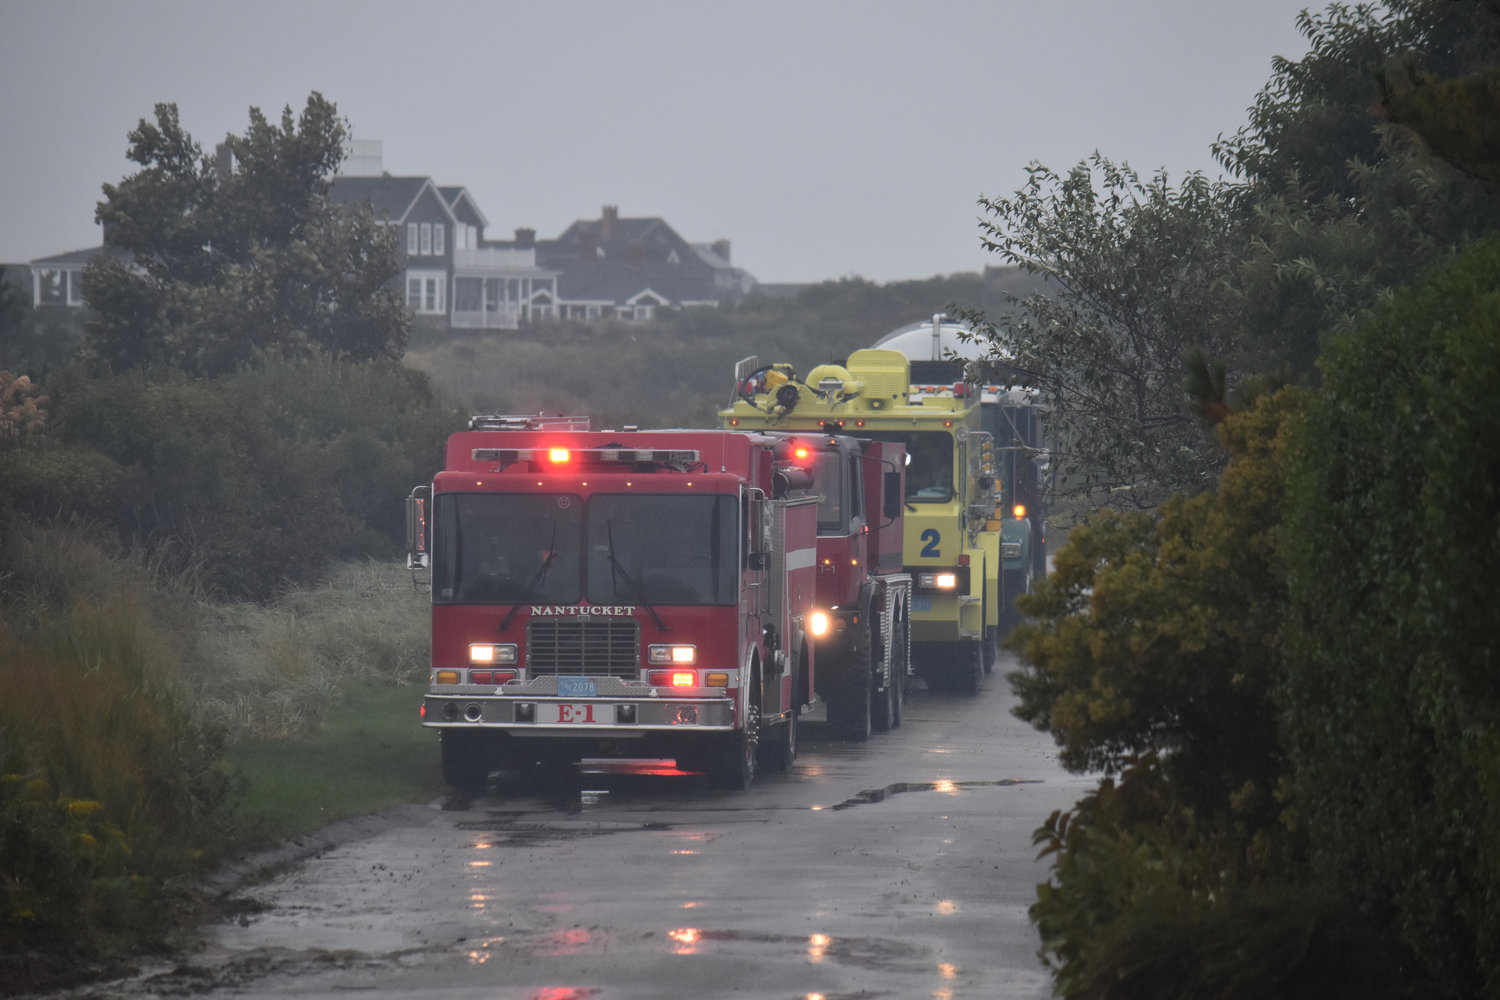 Response to Saturday's fire included multiple NFD engines, mutual aid from Hyannis, Nantucket Memorial Airport, the Land Bank and off-duty Coast Guard.